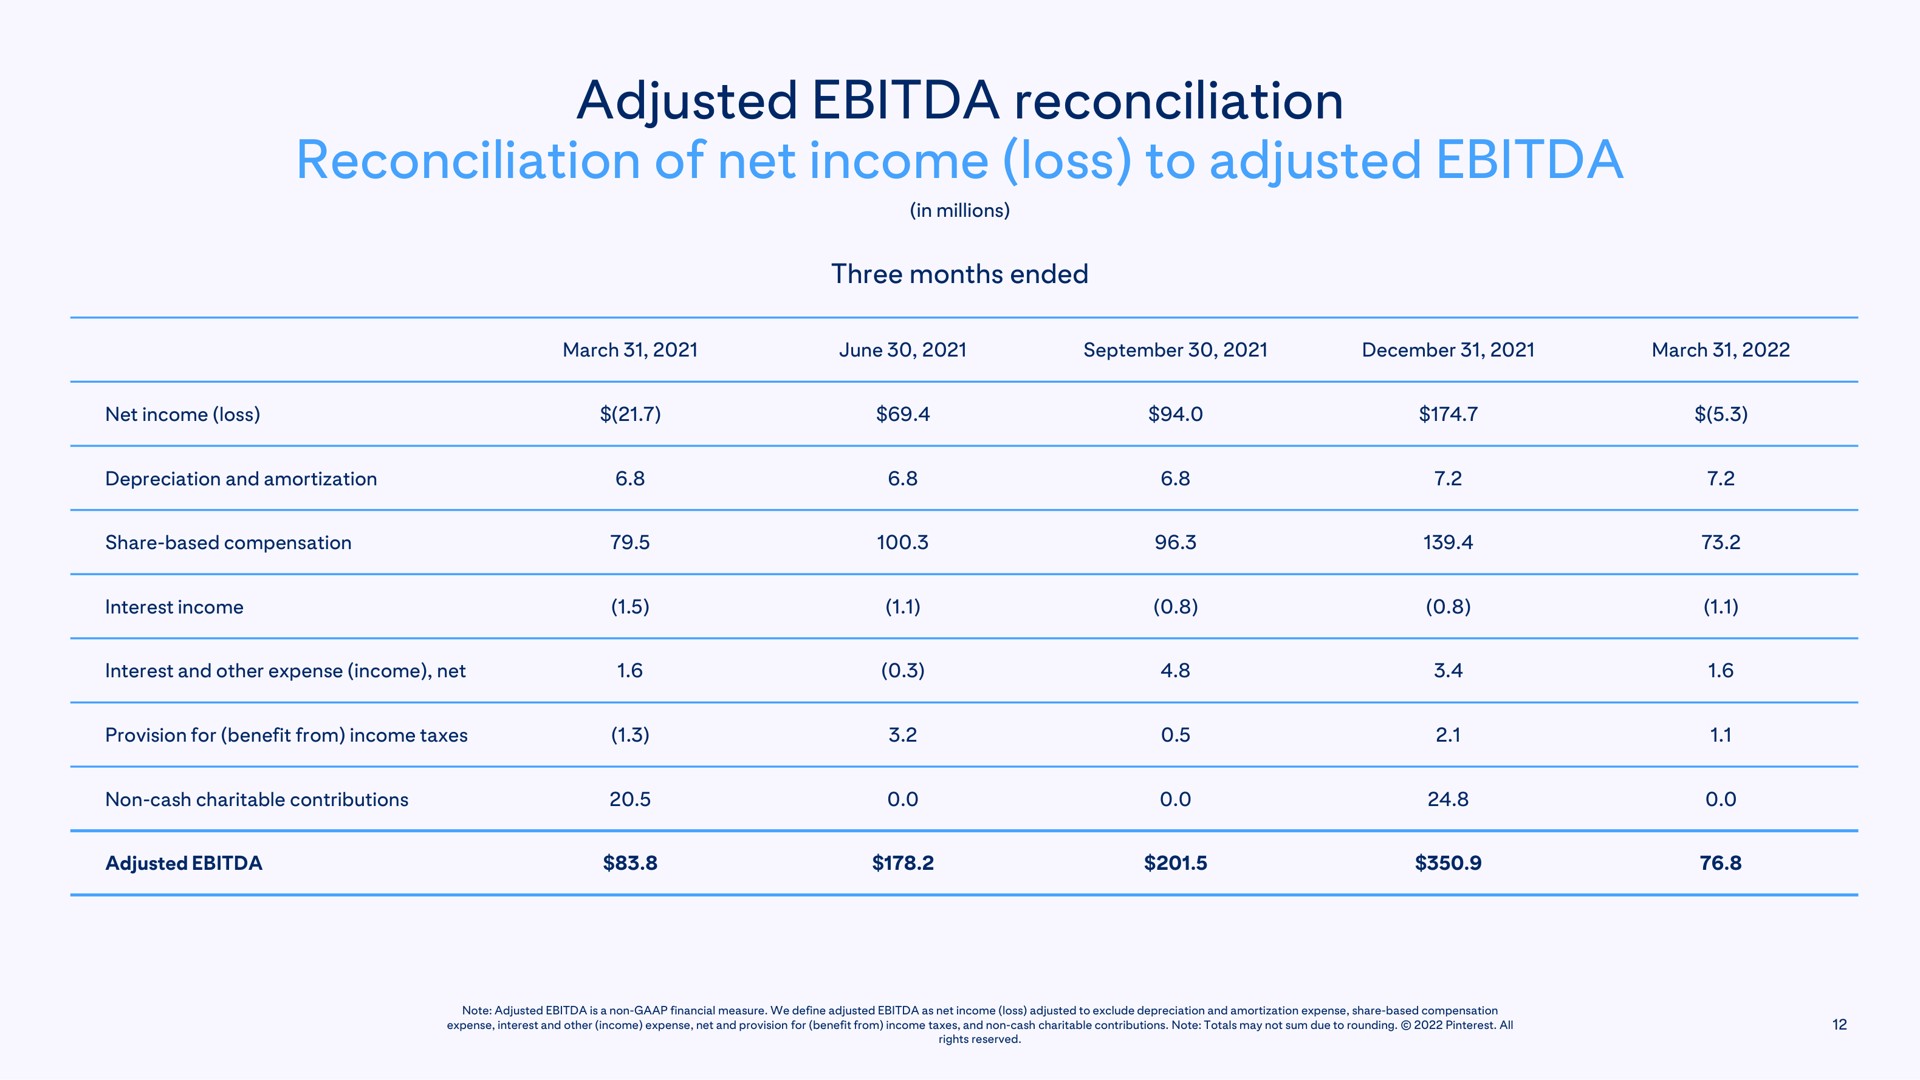 adjusted reconciliation reconciliation of net income loss to adjusted | Pinterest